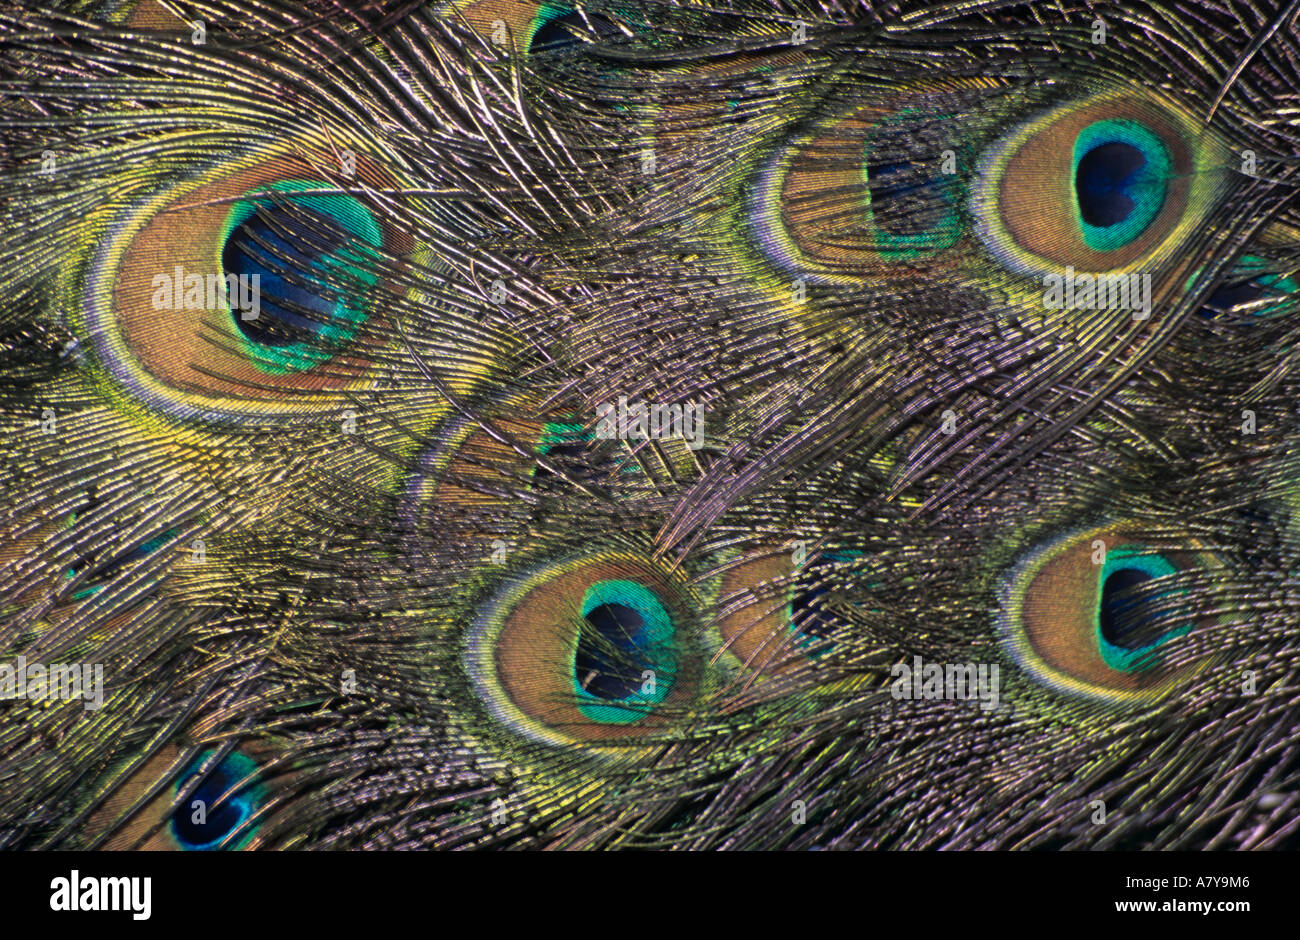 PATTERN of EYES on a Peacock's tail feathers in close up. England UK Britain Stock Photo